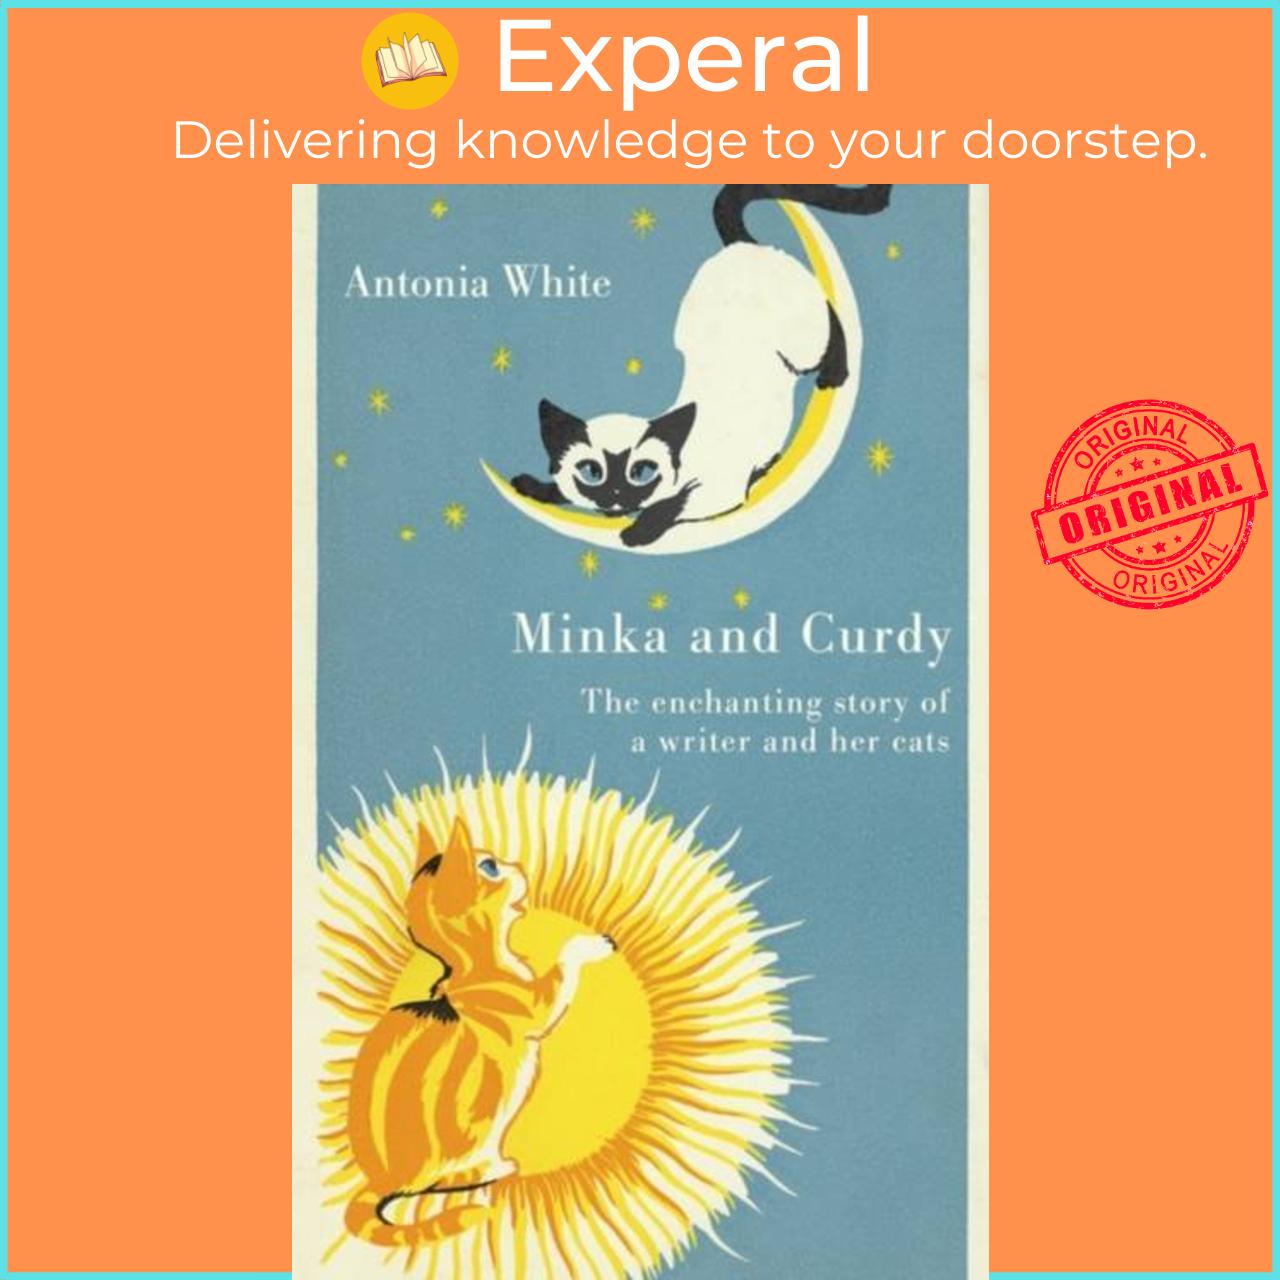 Hình ảnh Sách - Minka And Curdy - The enchanting story of a writer and her cats by Antonia White (UK edition, hardcover)